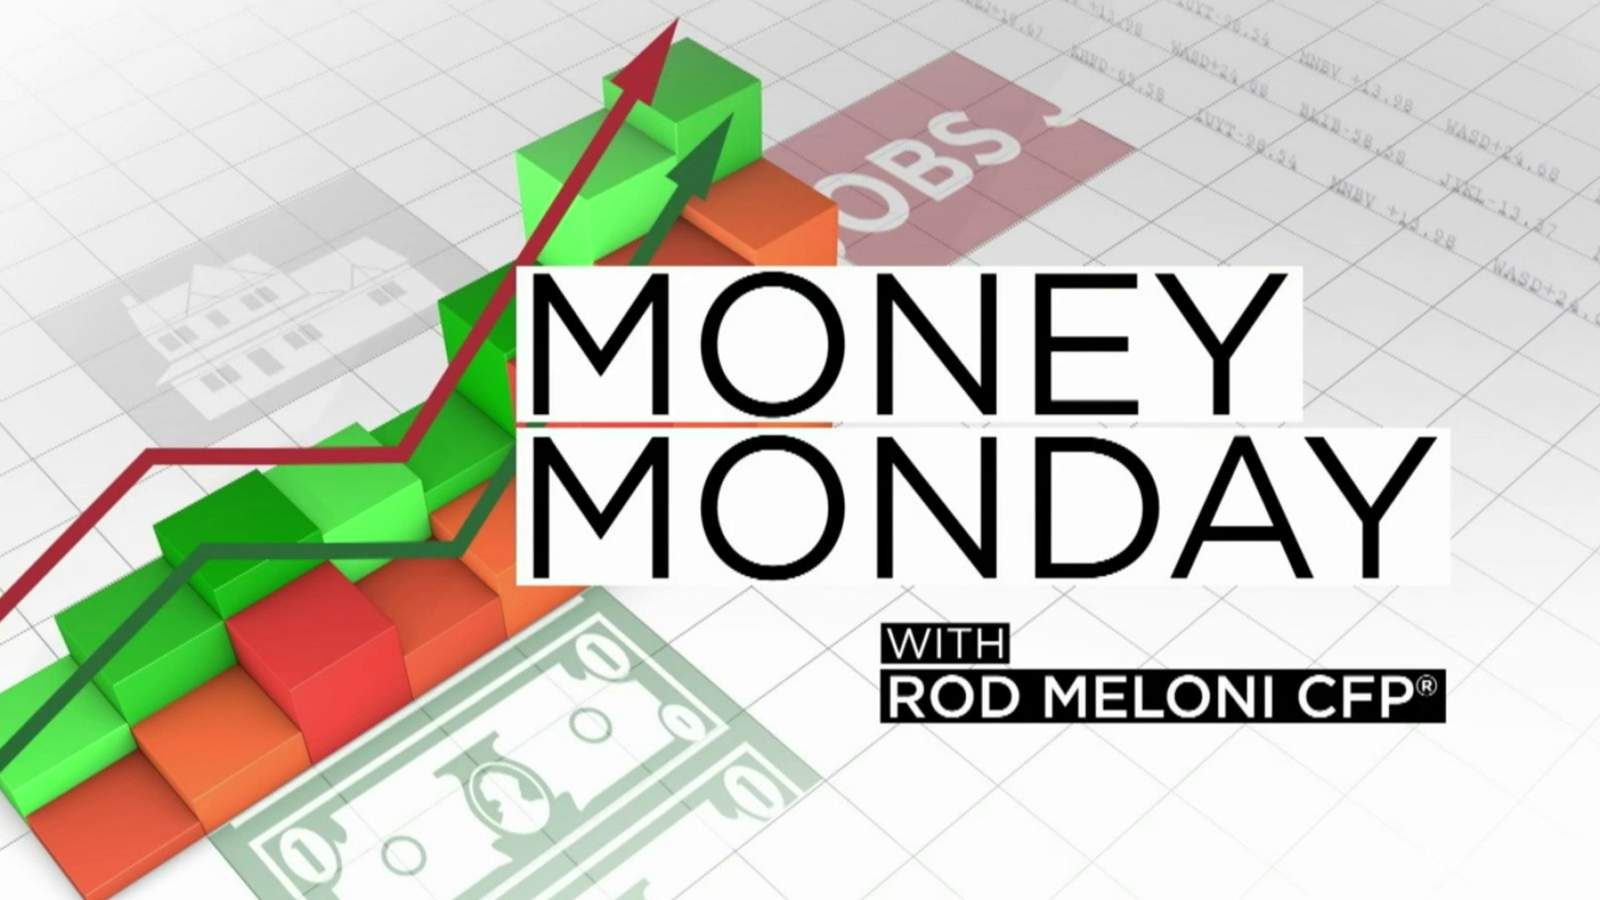 Money Monday: A one-stop shop for free personal finance